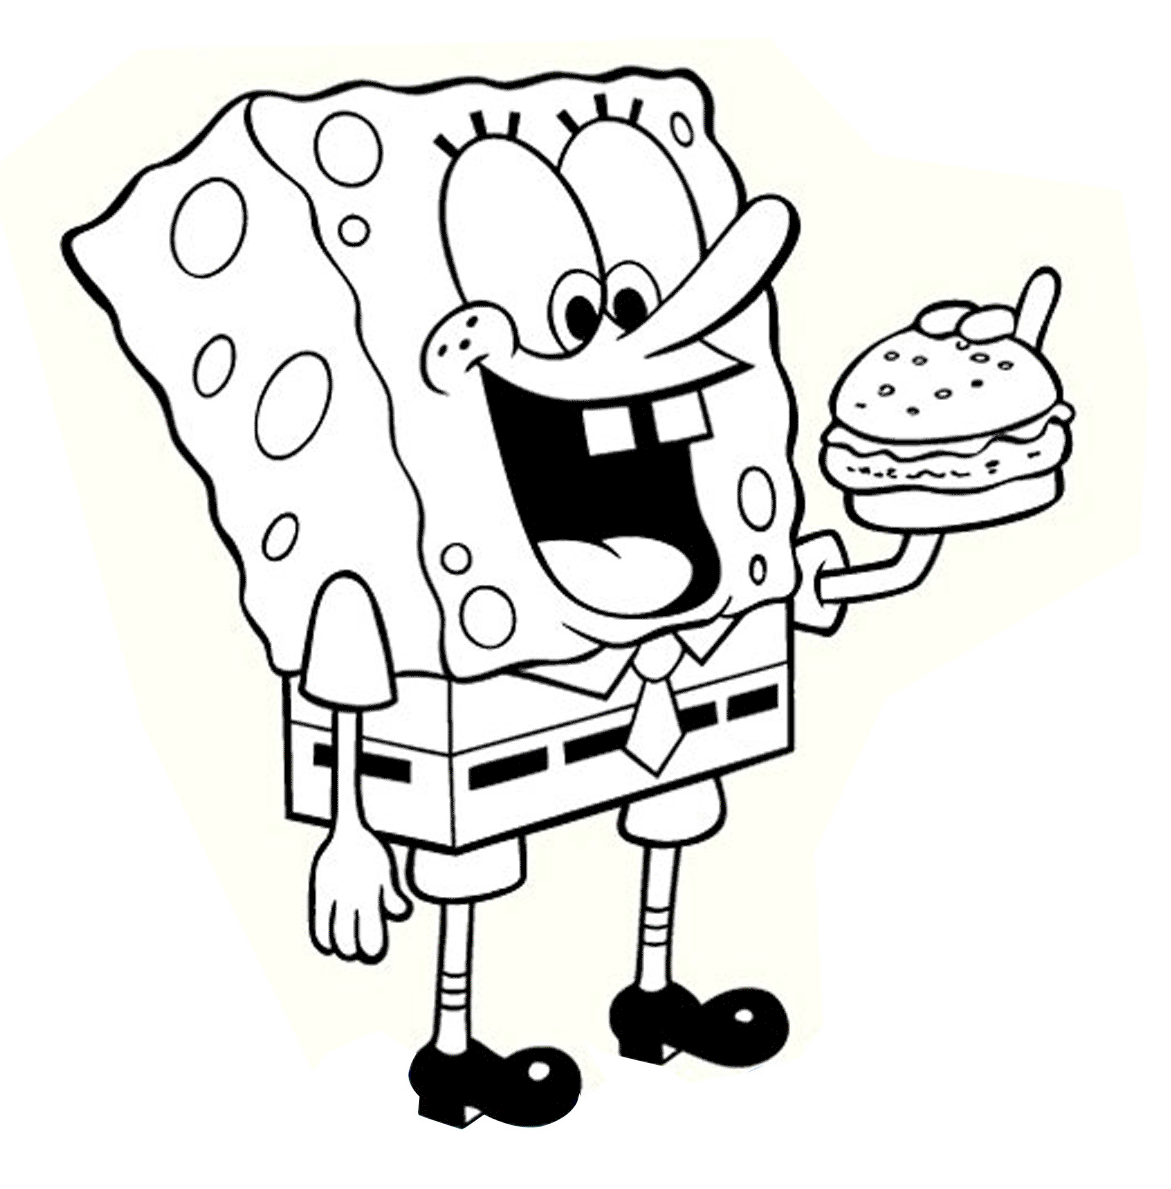 Spongebob Coloring Pages Coloring Pages Effy Moom Free Coloring Picture wallpaper give a chance to color on the wall without getting in trouble! Fill the walls of your home or office with stress-relieving [effymoom.blogspot.com]